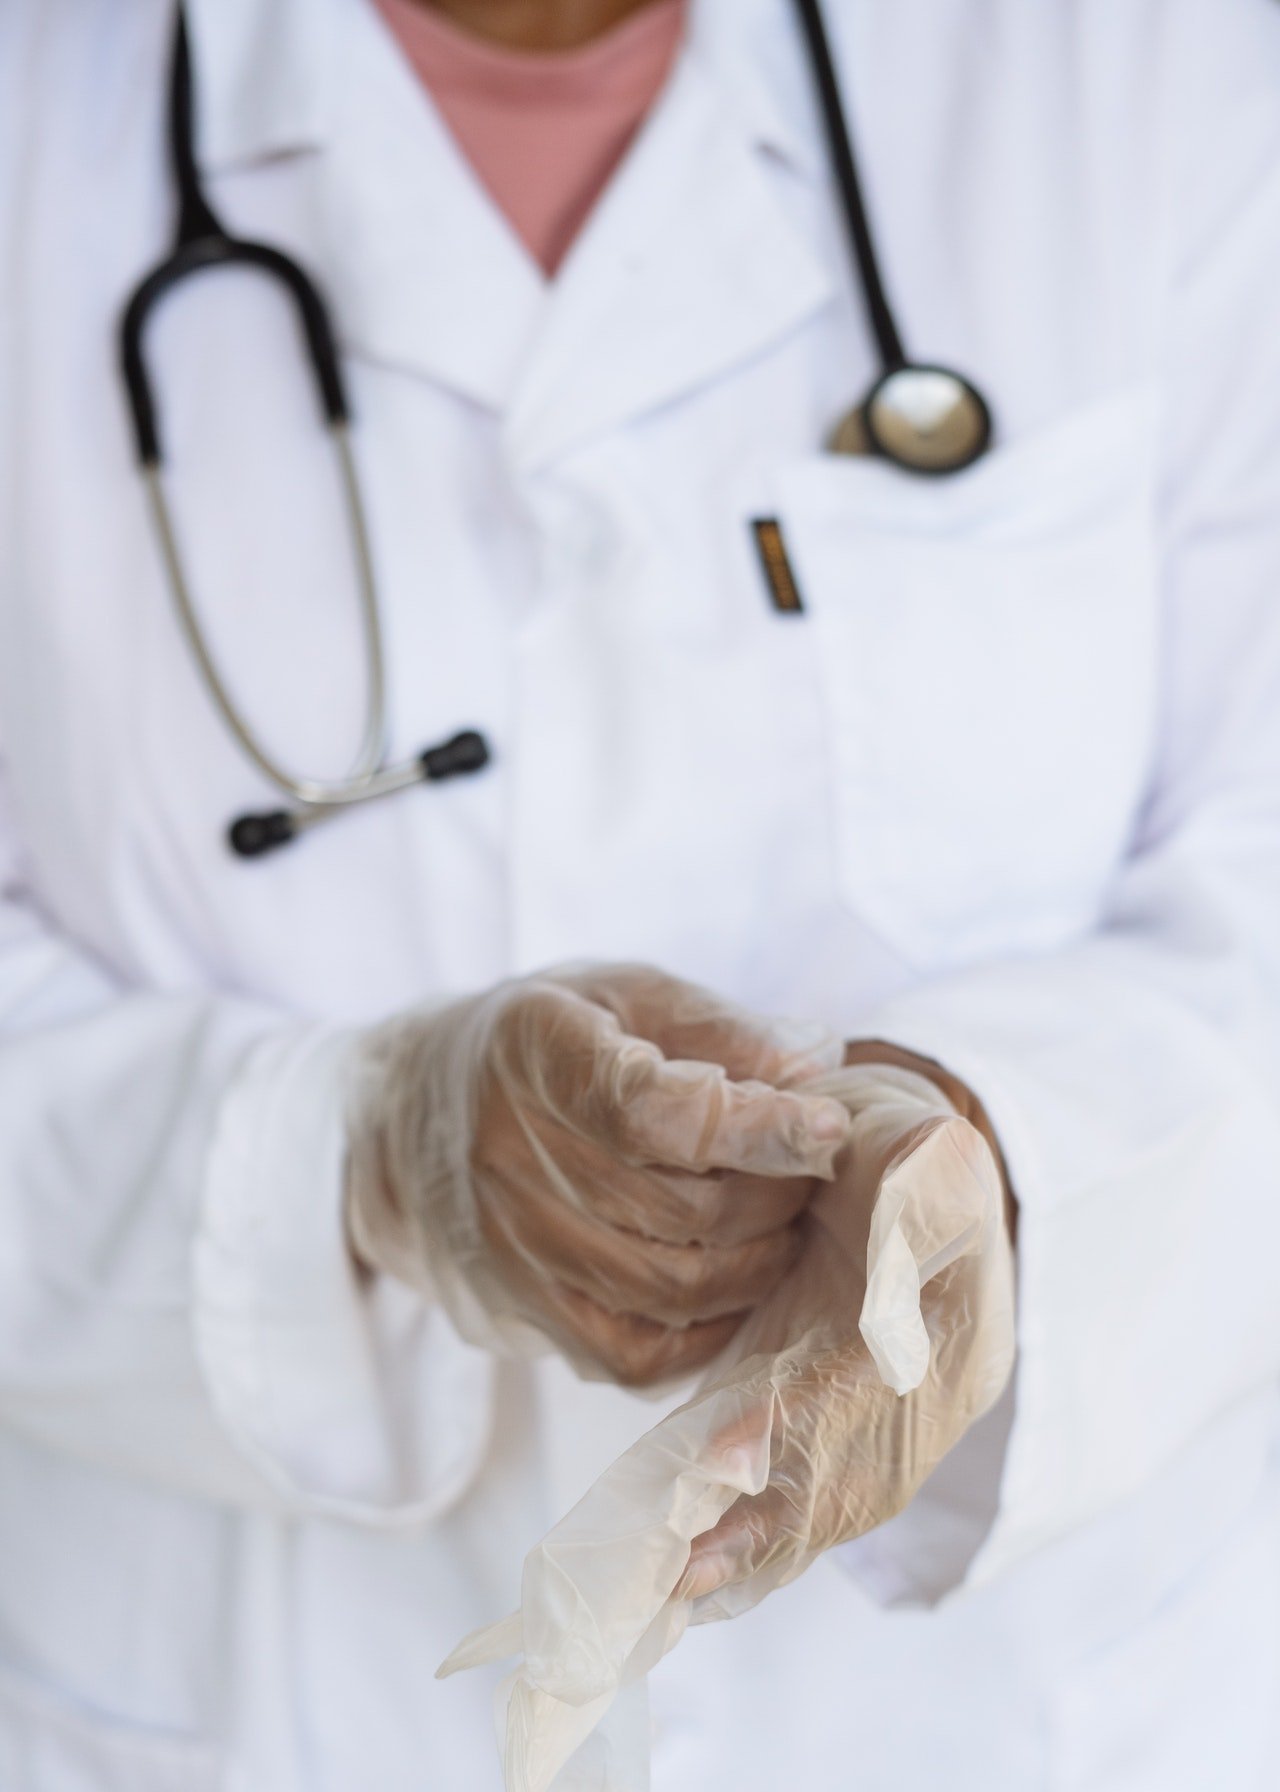 Doctor putting on gloves | Source: Pexels